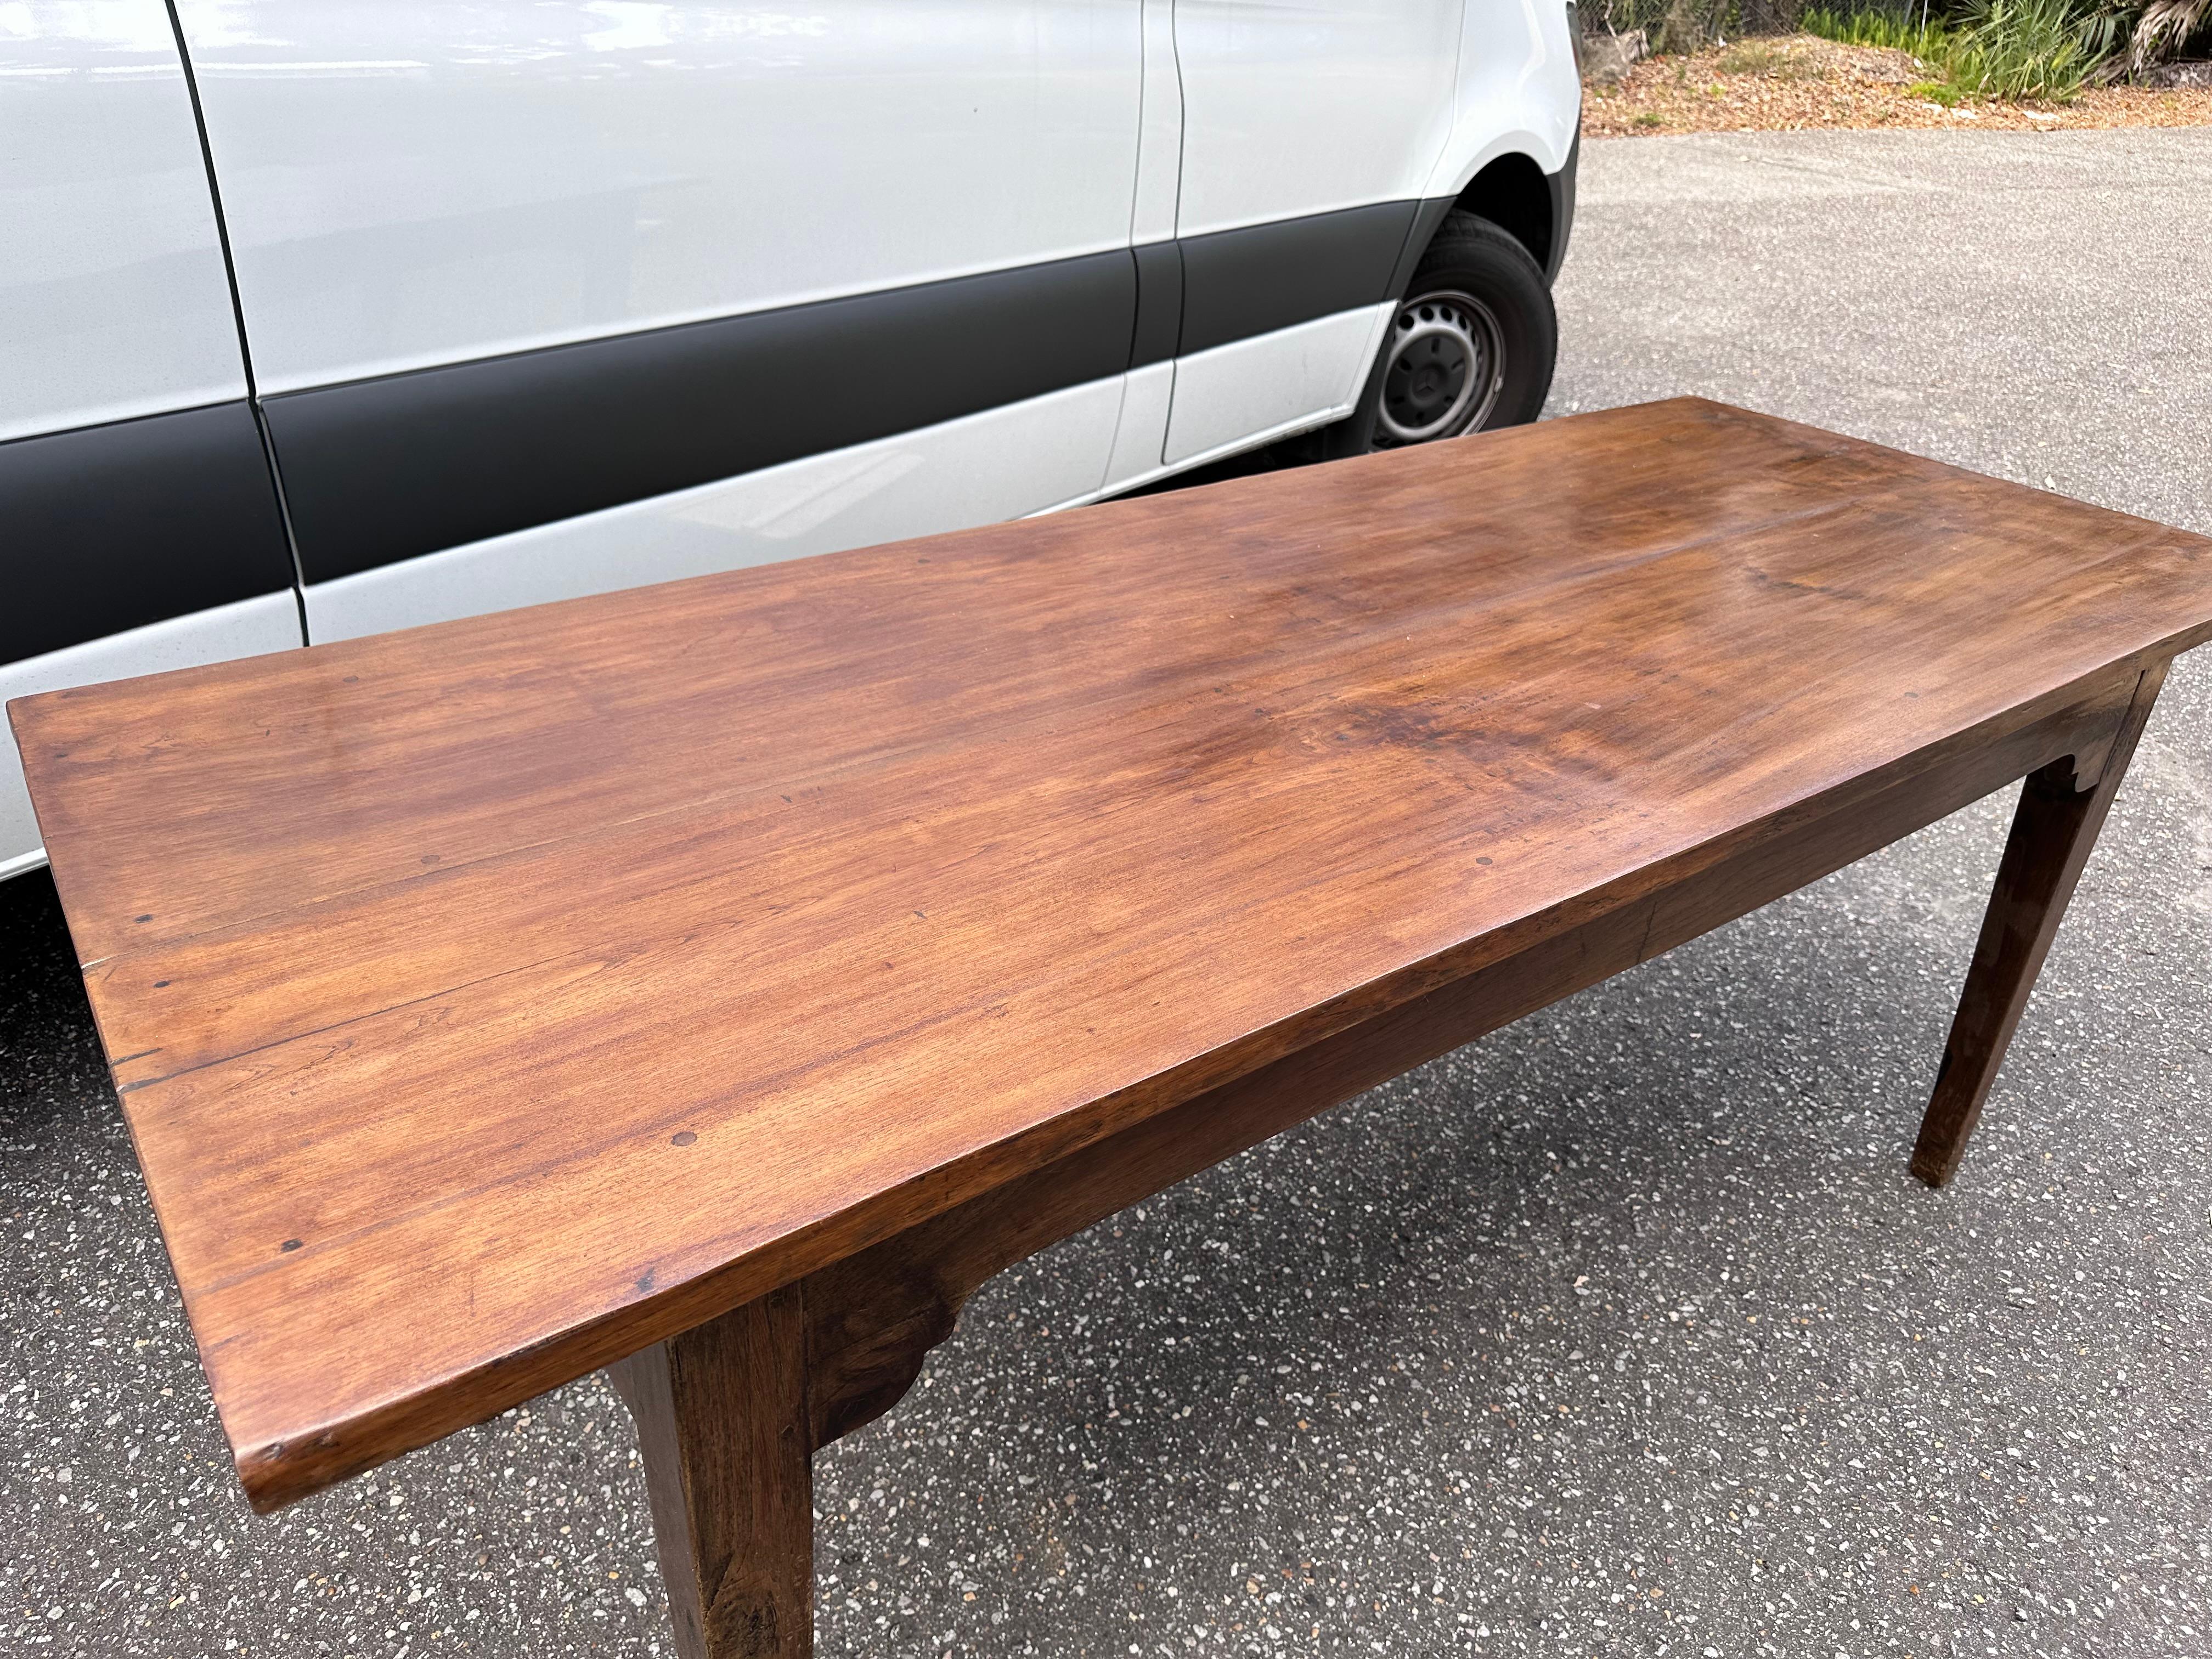 This is a beautiful 19th century French farm table! The wood is of a dark color and beautifully waxed the scalloping above the legs add the perfect touch of refined elegance. This item is perfect for any lover of traditional interiors and would make